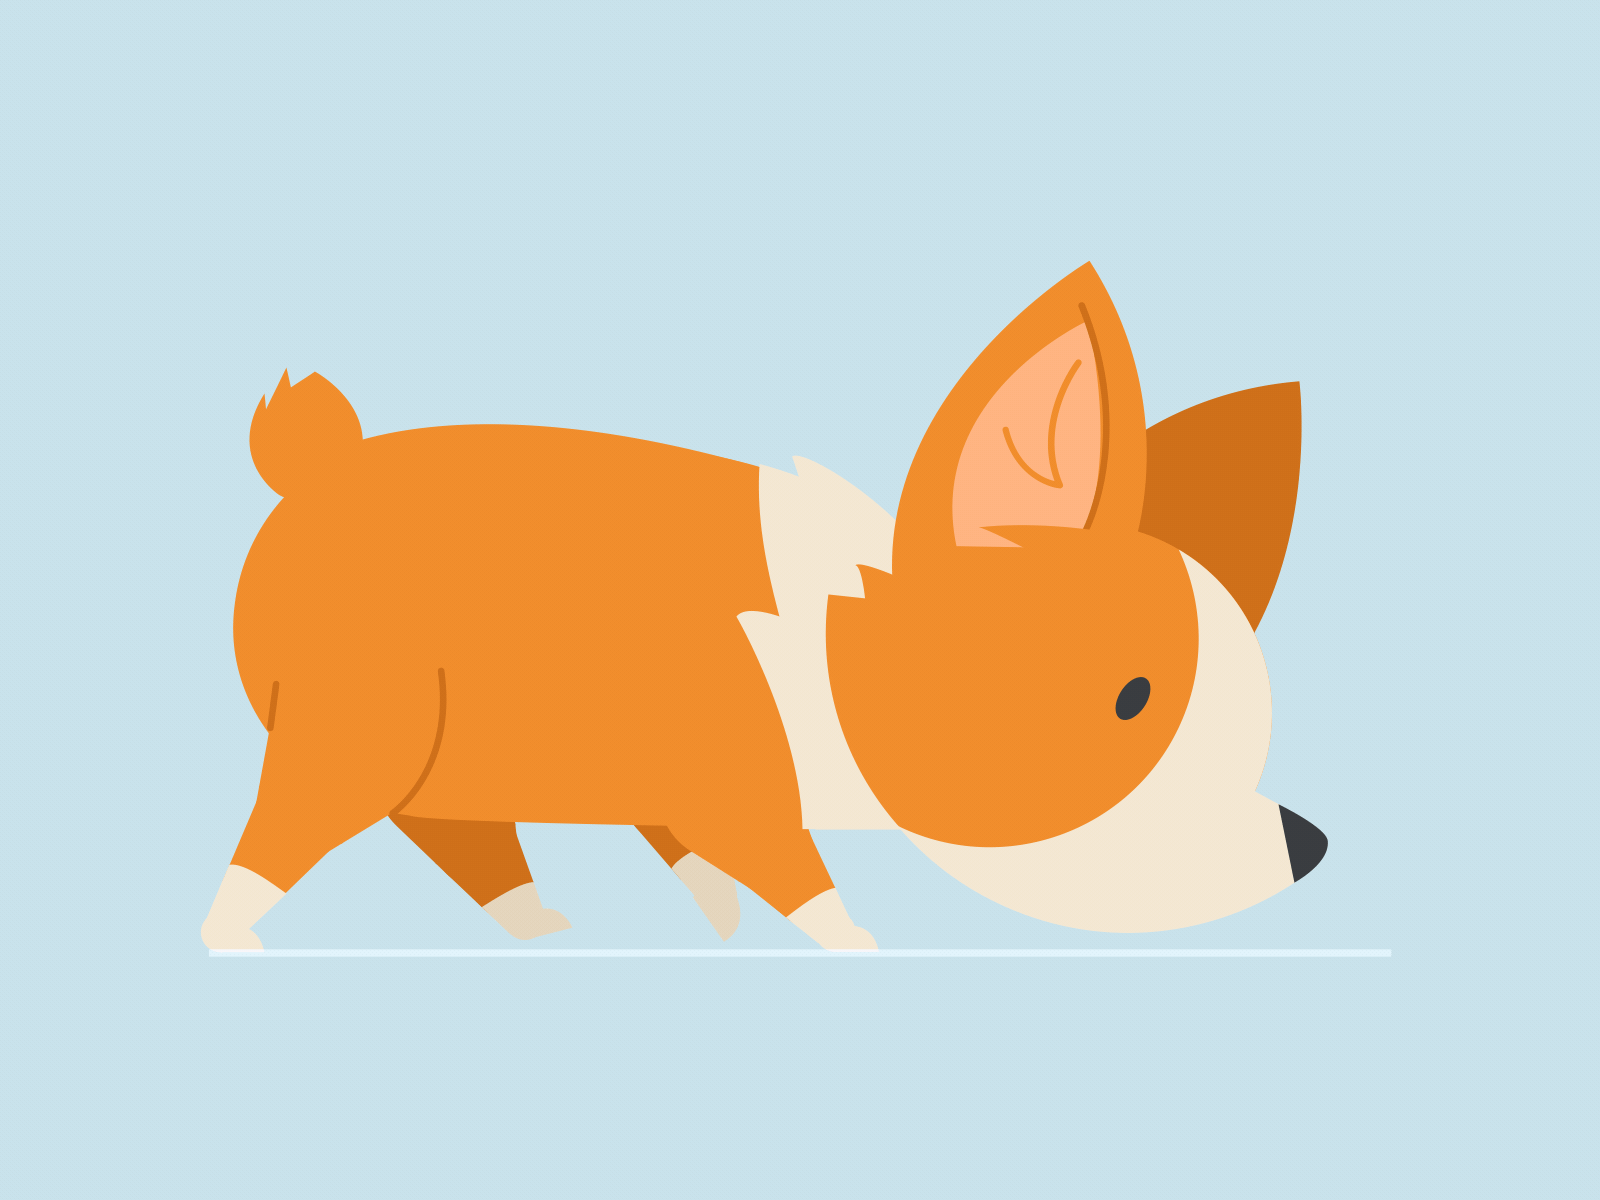 Dog Sniffing Walk Cycle by Rosie Phillpot on Dribbble